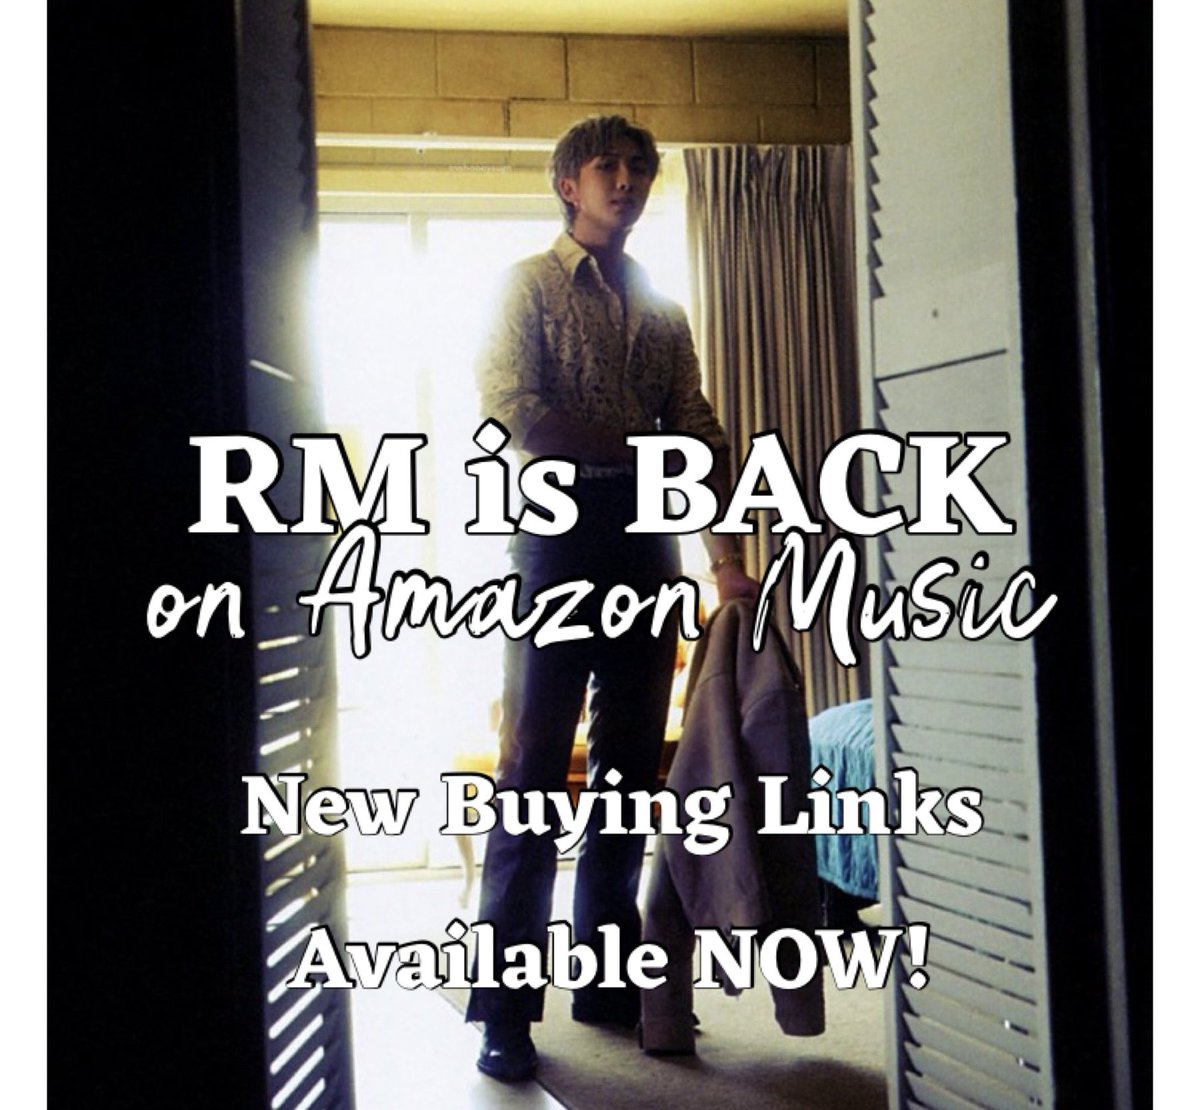 ***NEW***
AMAZON BUYING LINKS

We have new Amazon buying links:

OG: amazon.com/Come-back-me-R…

RADIO EDIT: amazon.com/dp/B0D448PD4Q

🖇️ are also updated in carrd: army-onrpwp.carrd.co 

 If you already bought on Amazon you cannot buy again with same acct.

#ARMYonAmazonMusic